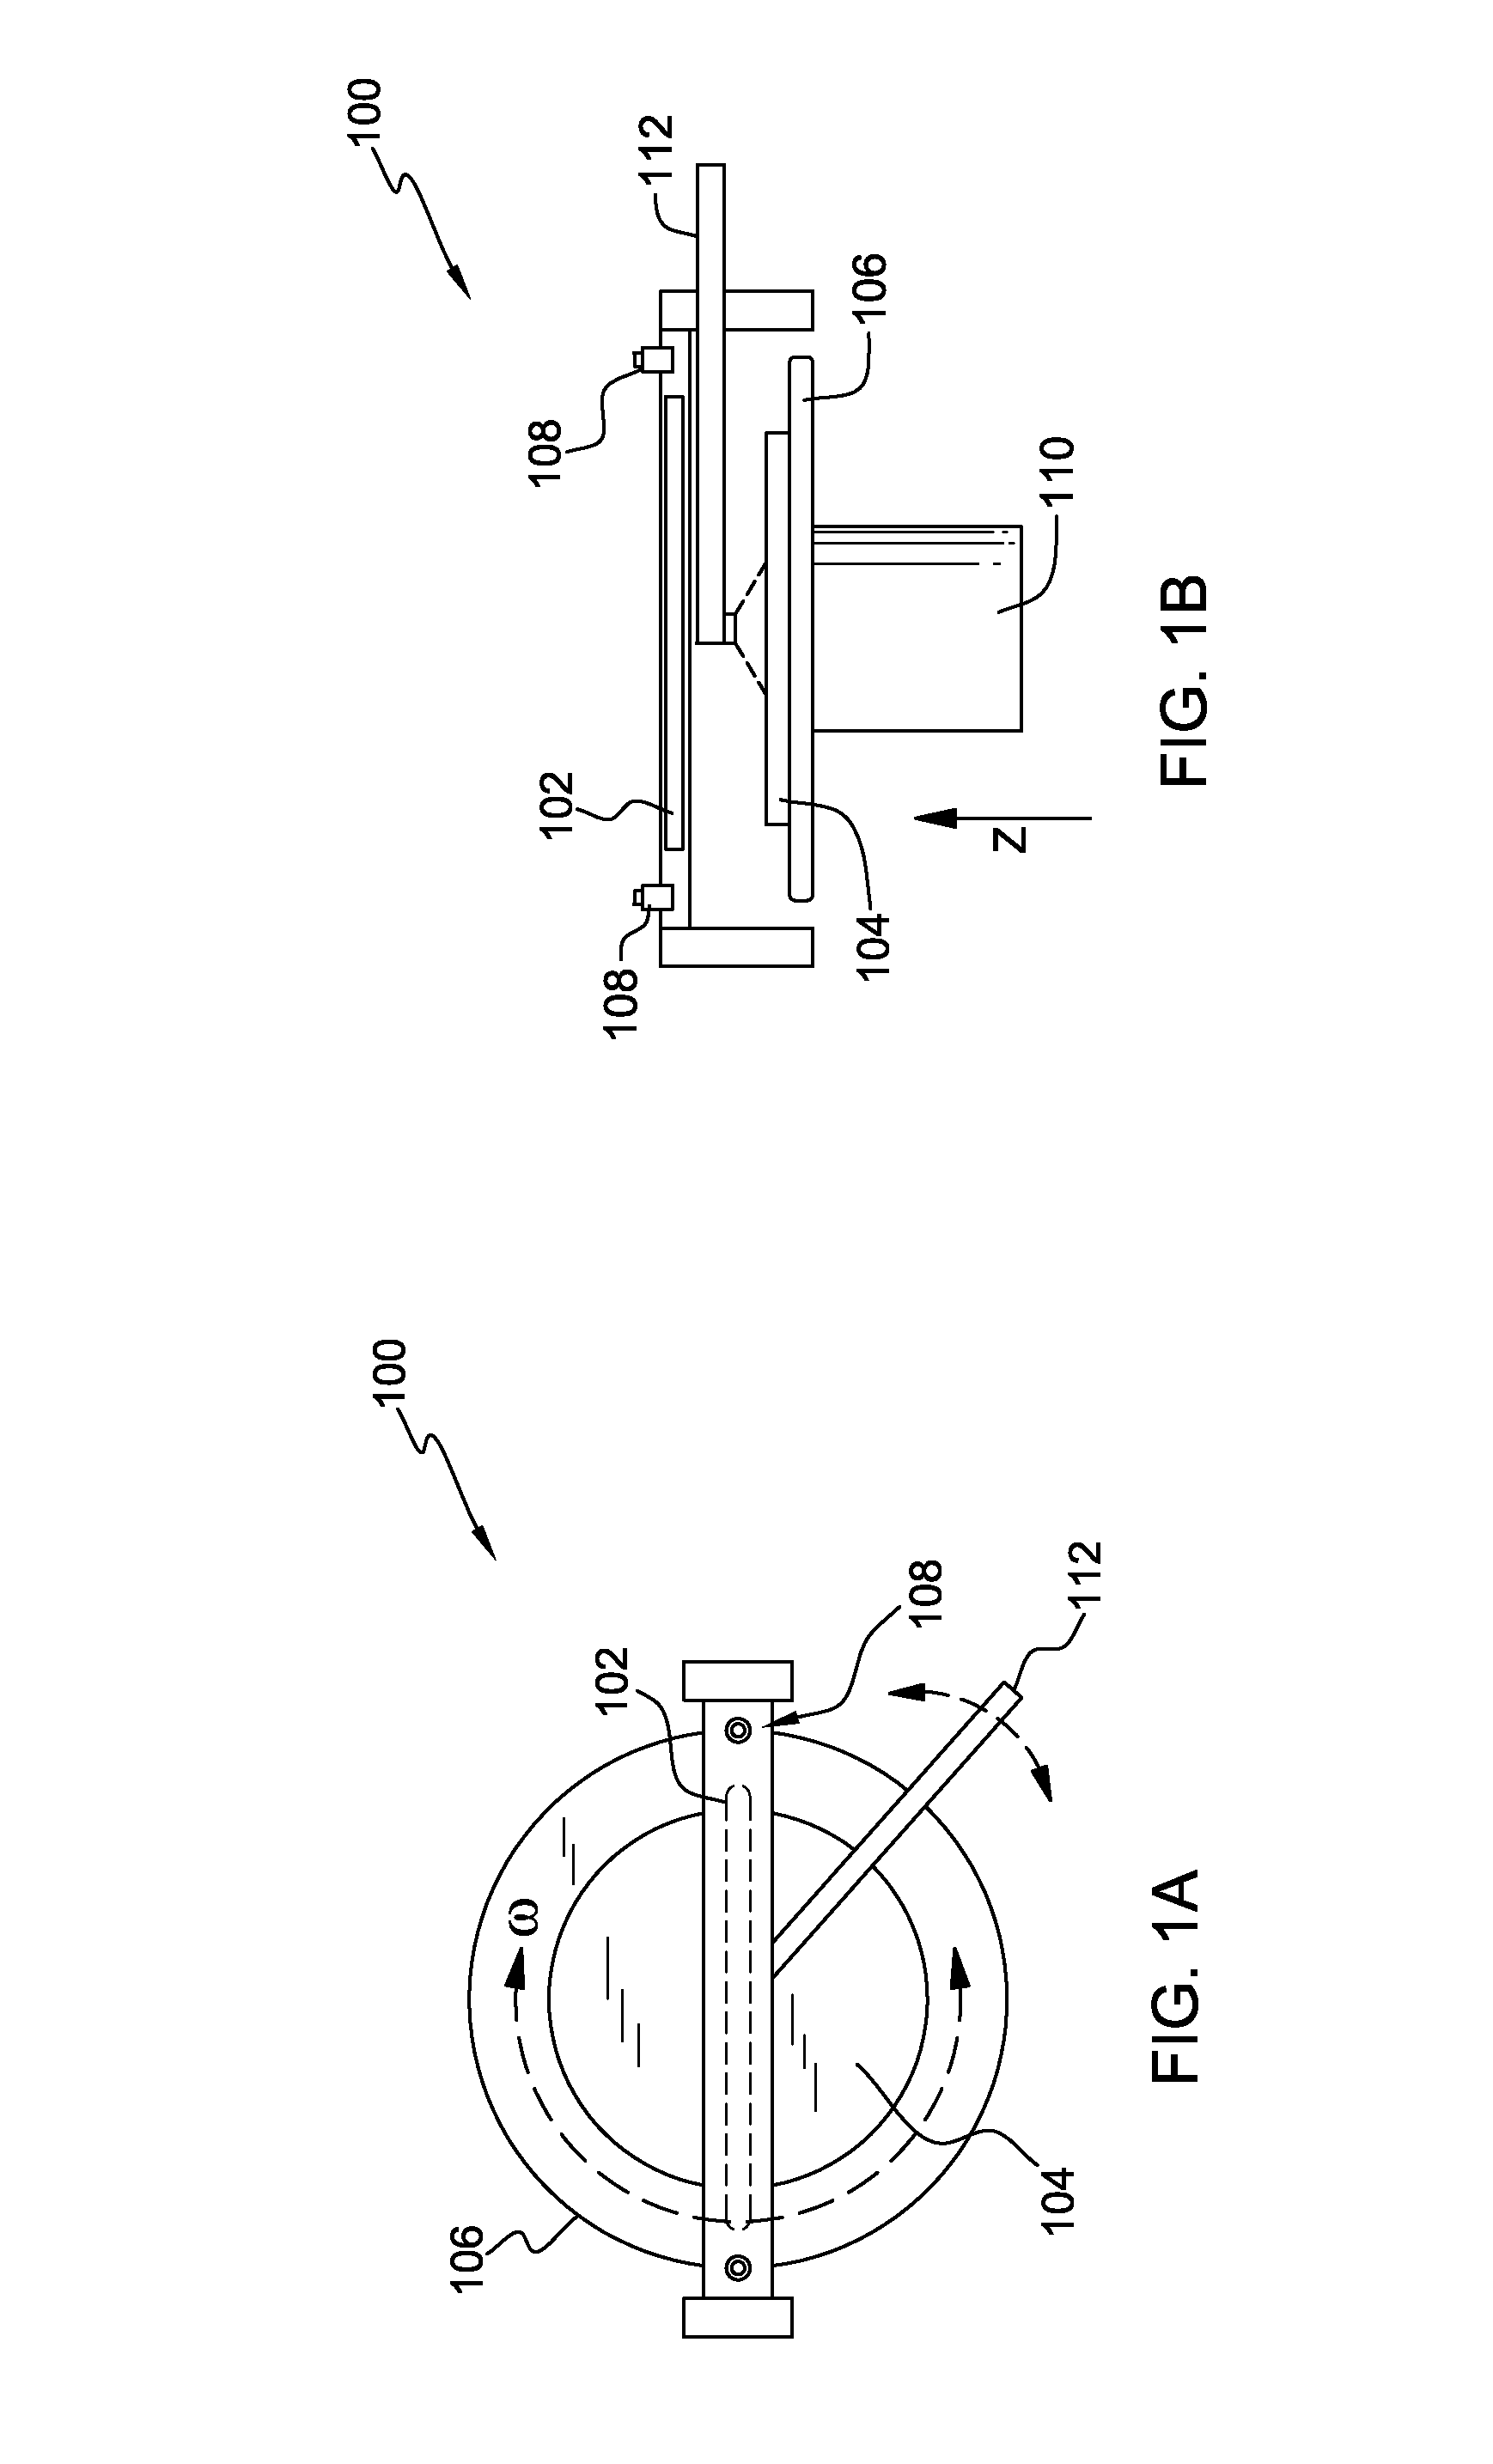 Light-assisted acoustic cleaning tool